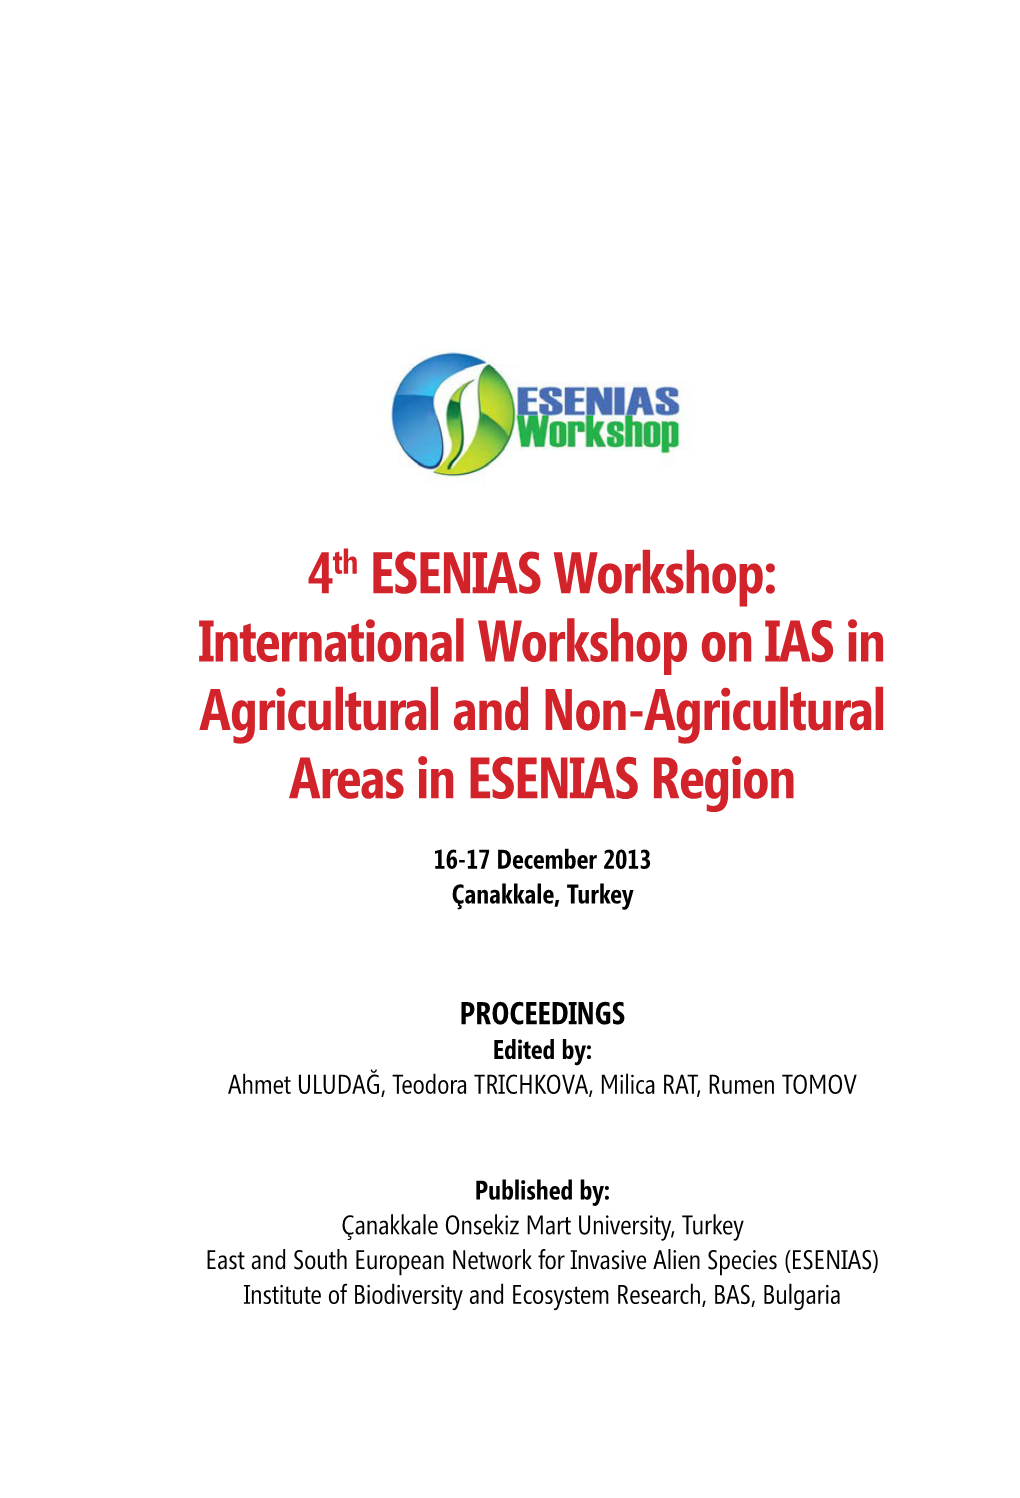 4Th ESENIAS Workshop: International Workshop on IAS in Agricultural and Non-Agricultural Areas in ESENIAS Region